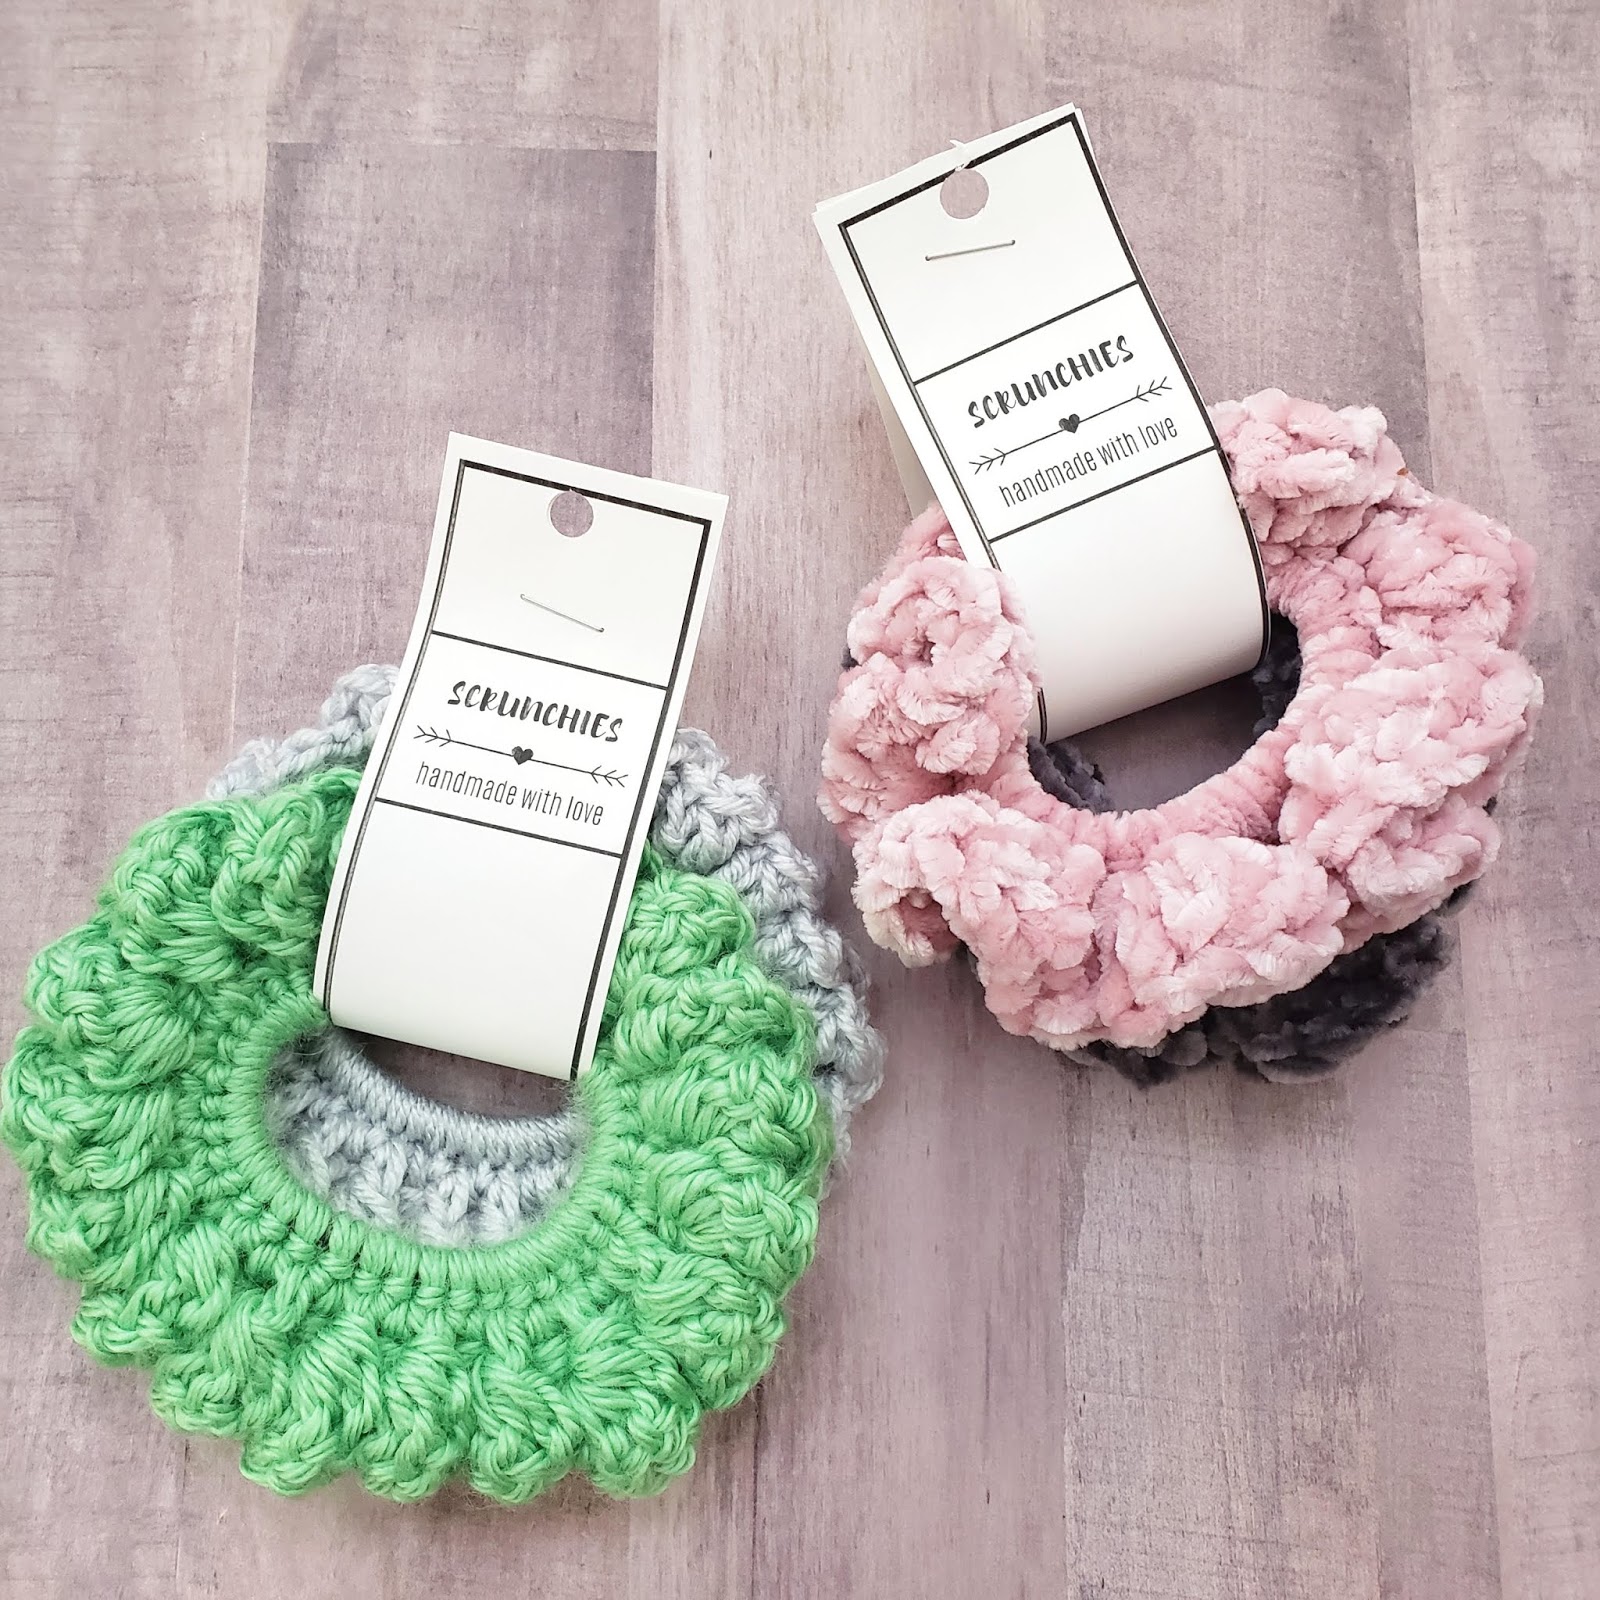 Scrunchie Tag Template Free